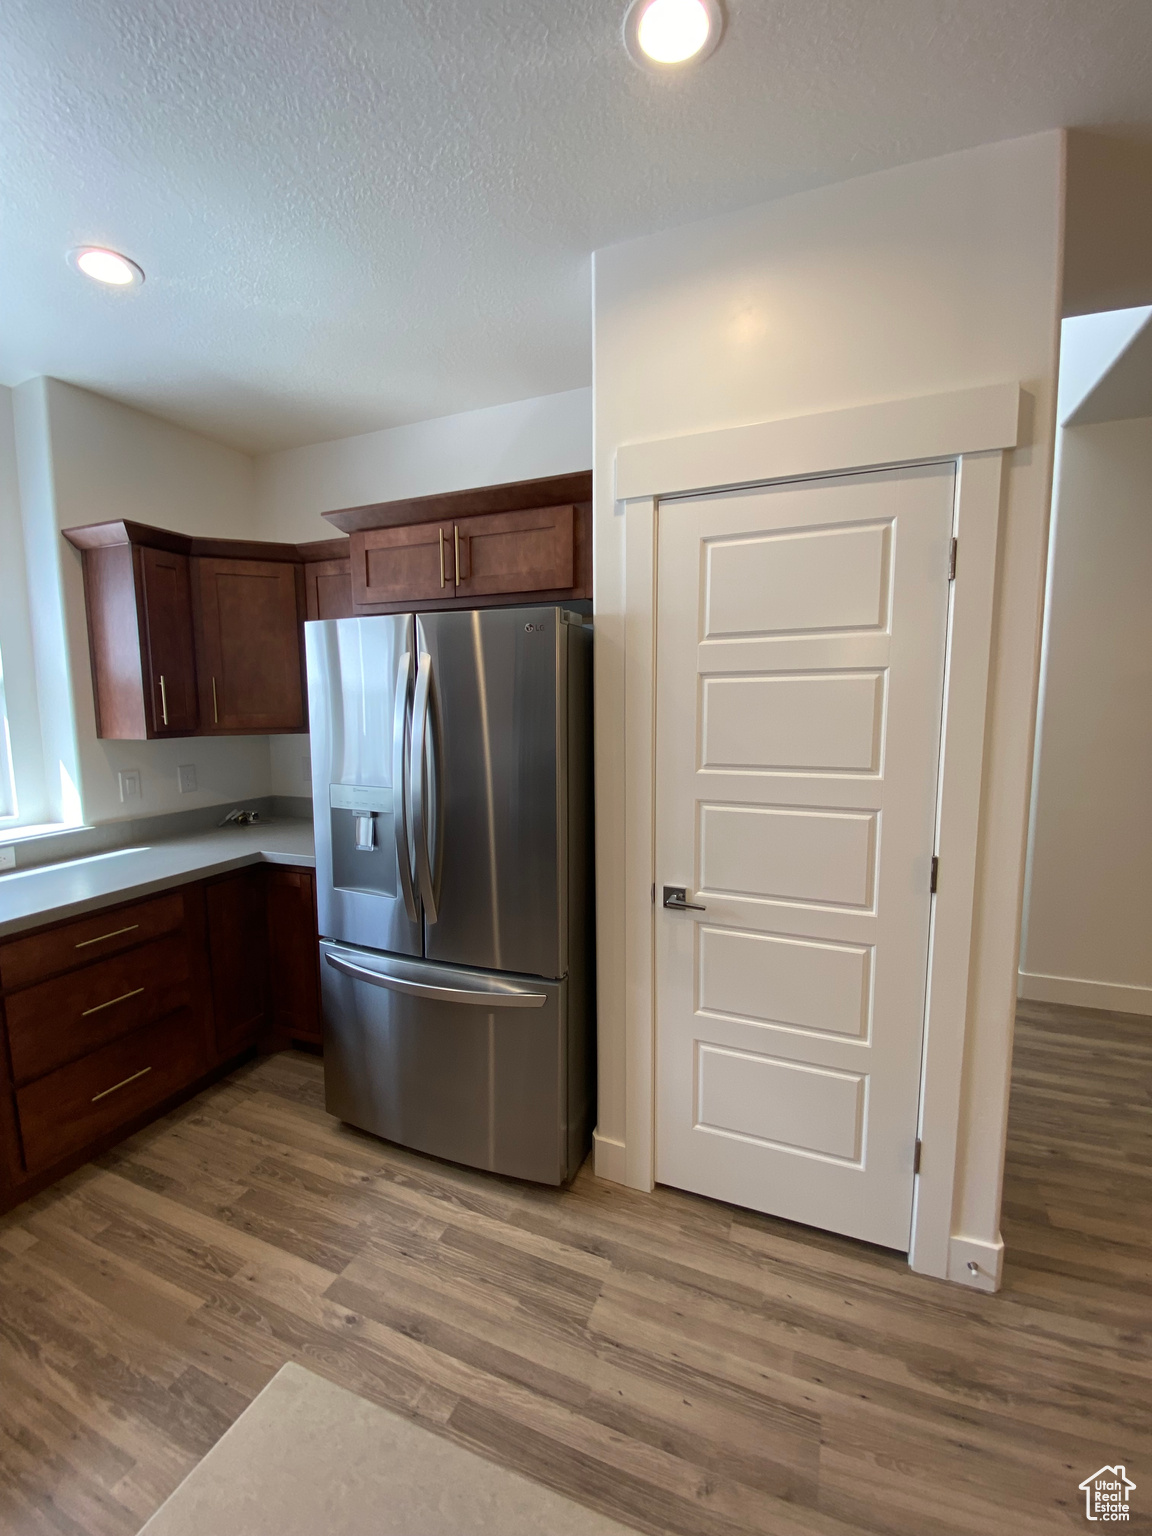 Kitchen with hardwood / wood-style flooring, stainless steel fridge with ice dispenser, and a textured ceiling